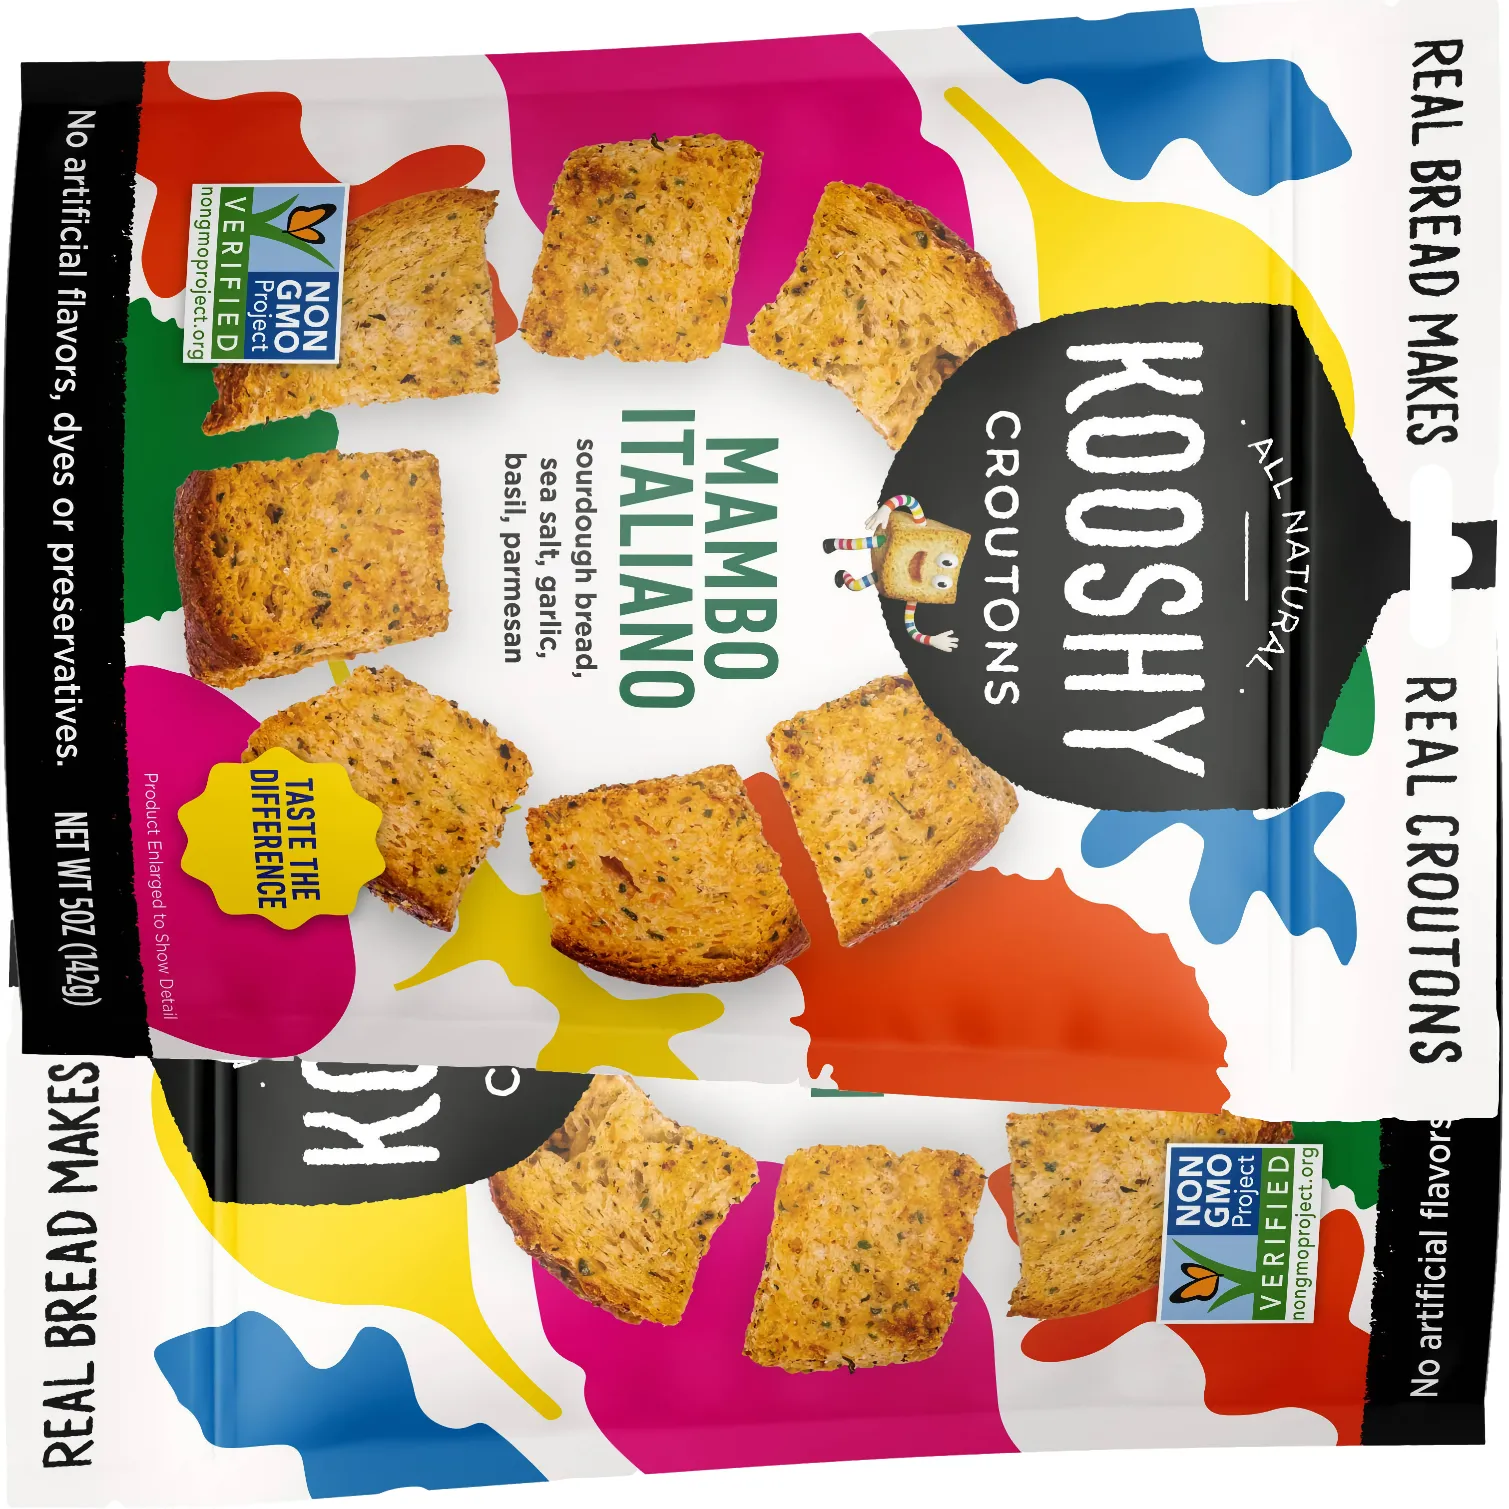 Free Kooshy Croutons At Whole Foods